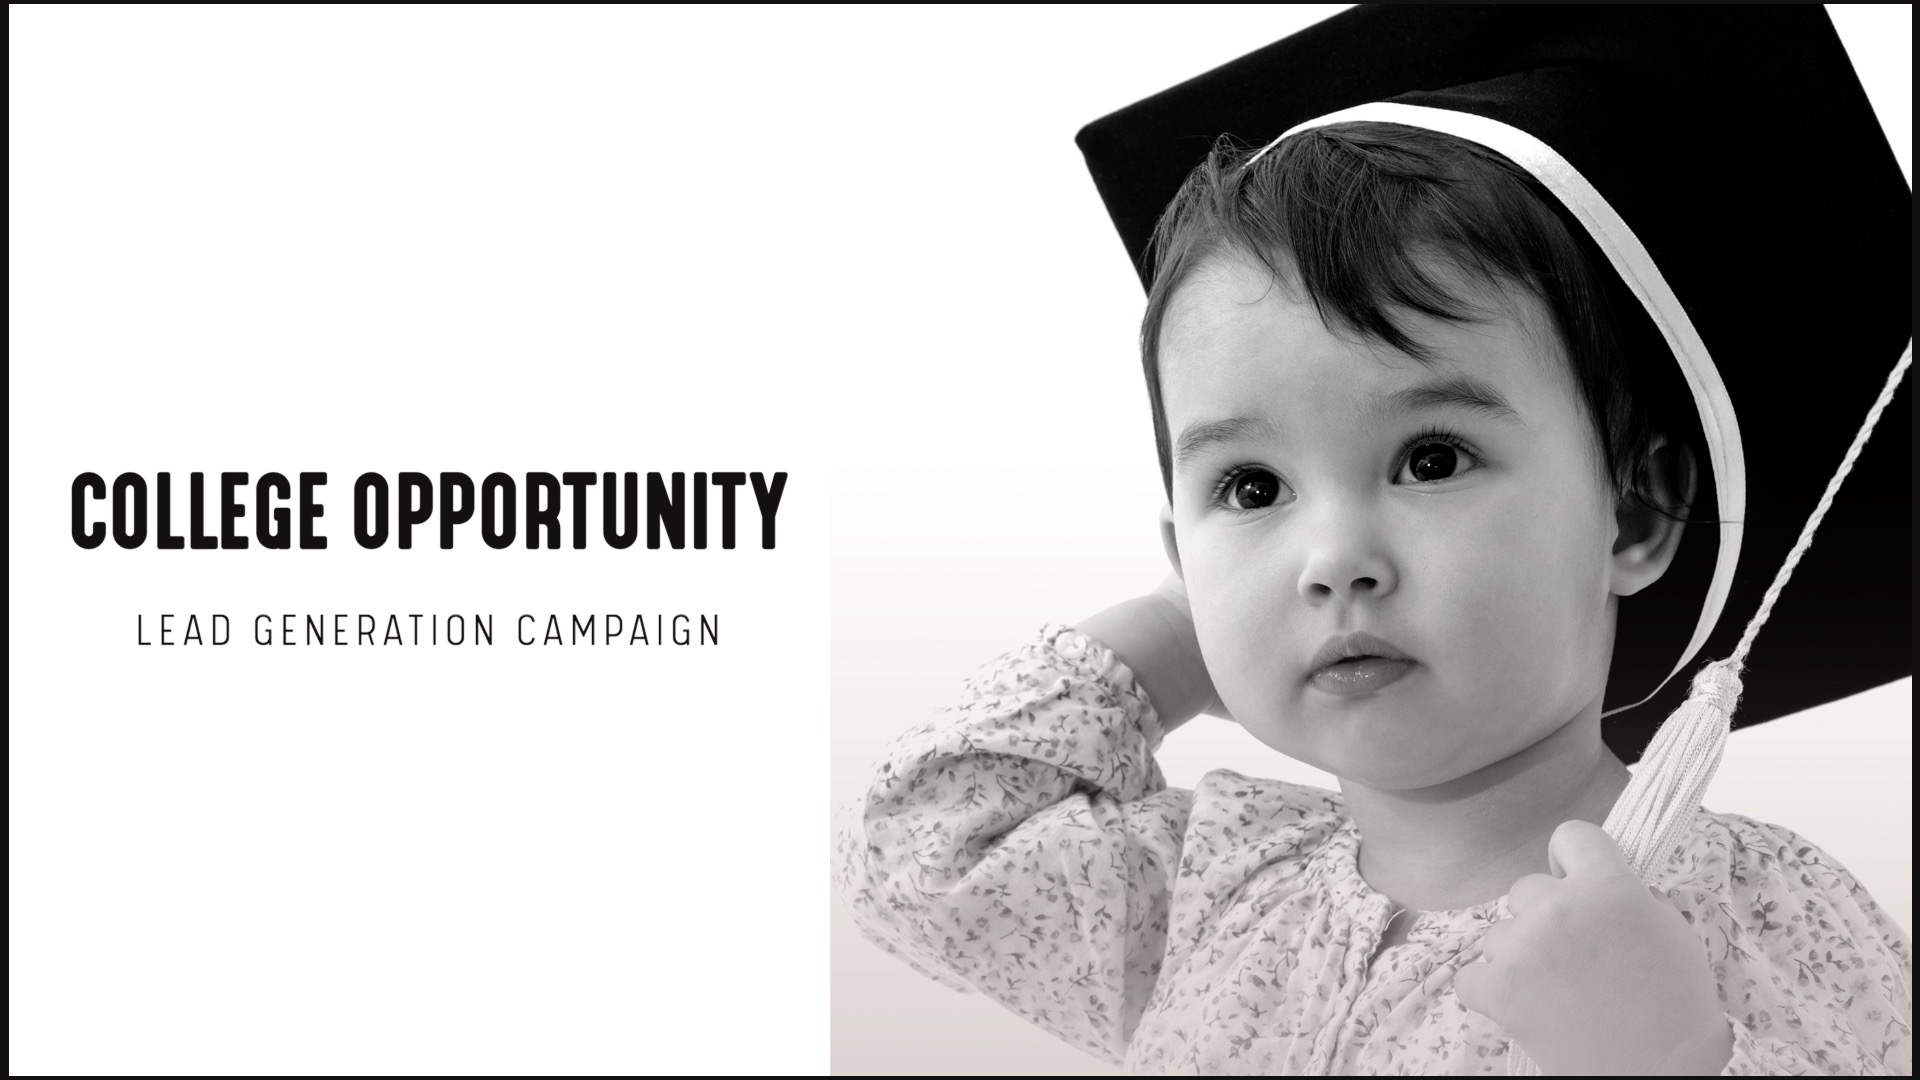 [NEW] Lead Gen Campaign | College Opportunity